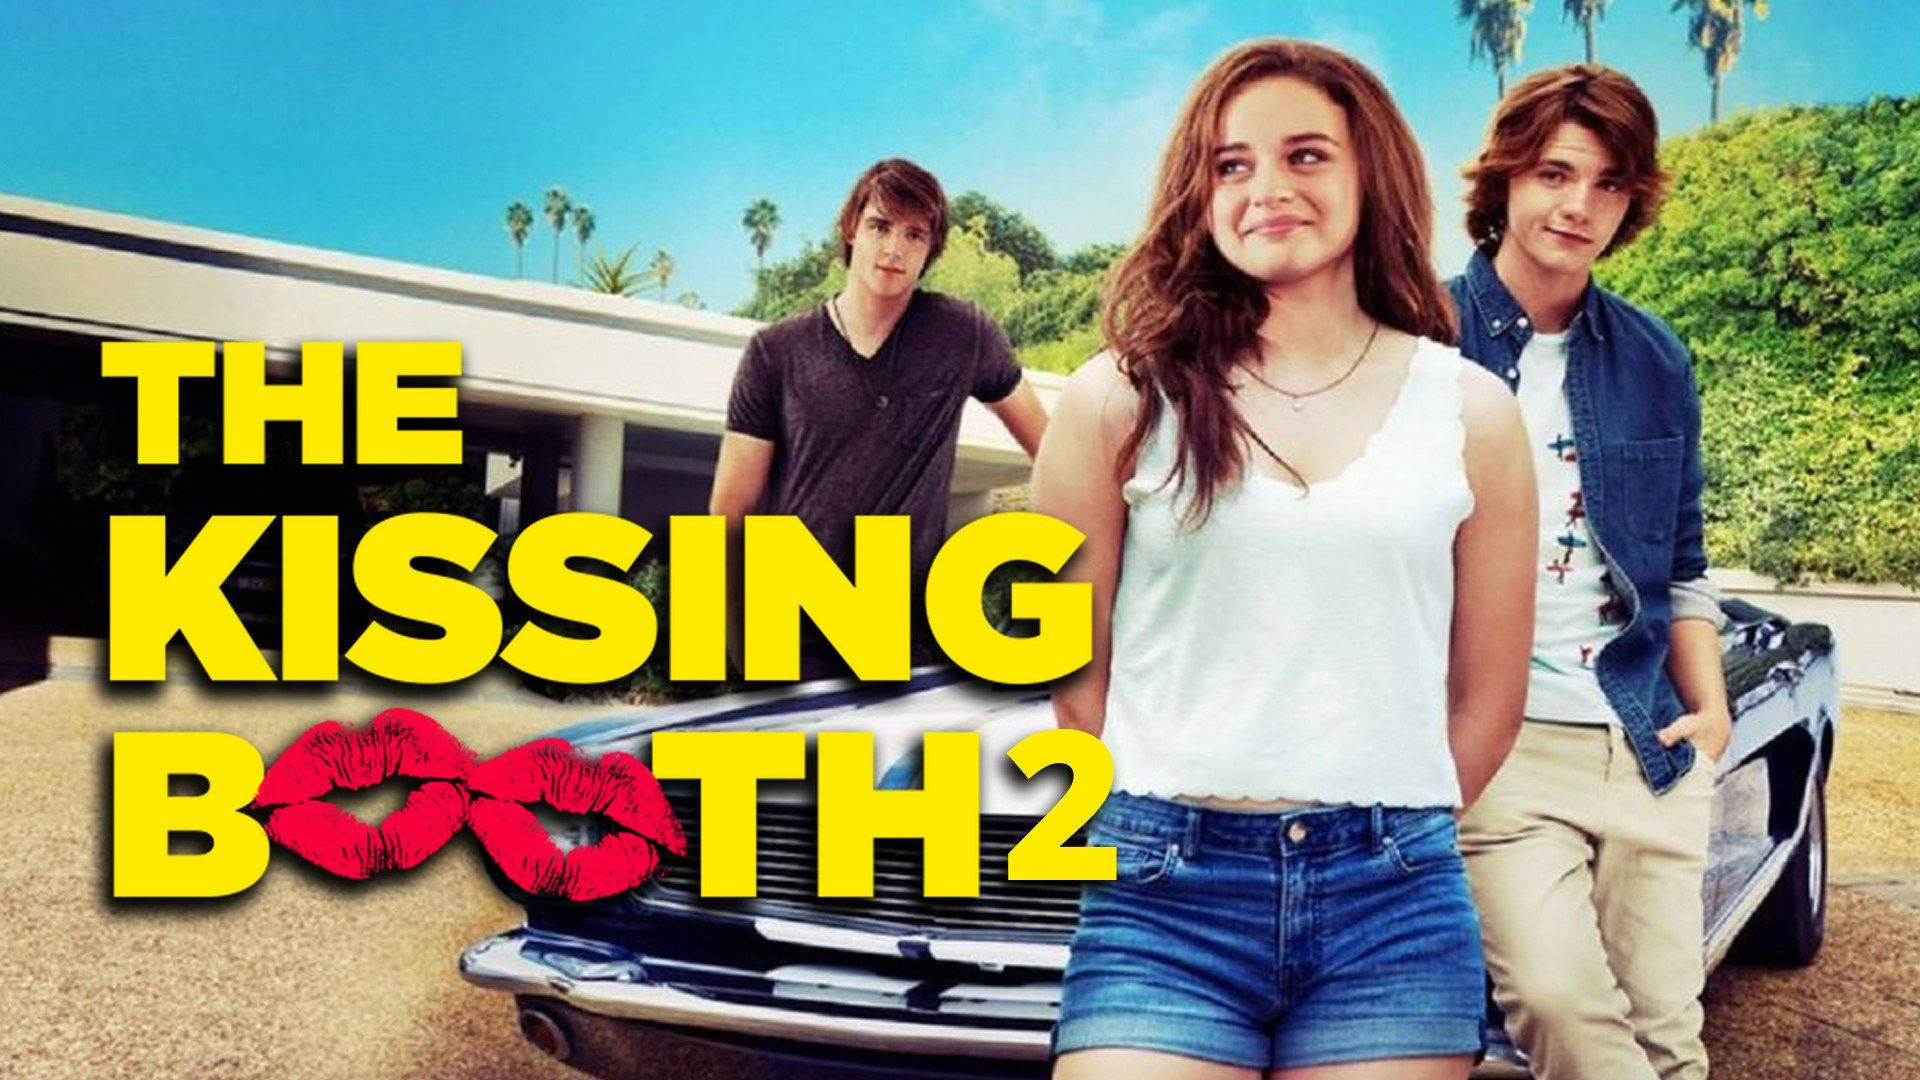 The Kissing Booth 2 Movie Poster Background